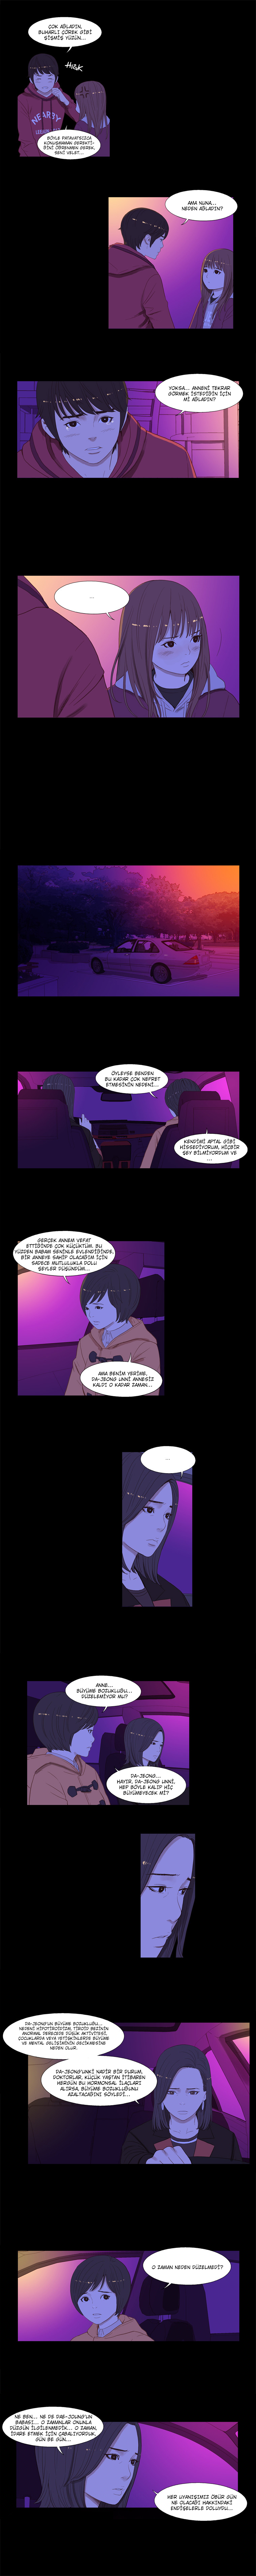 The Friendly Winter: Chapter 34 - Page 3